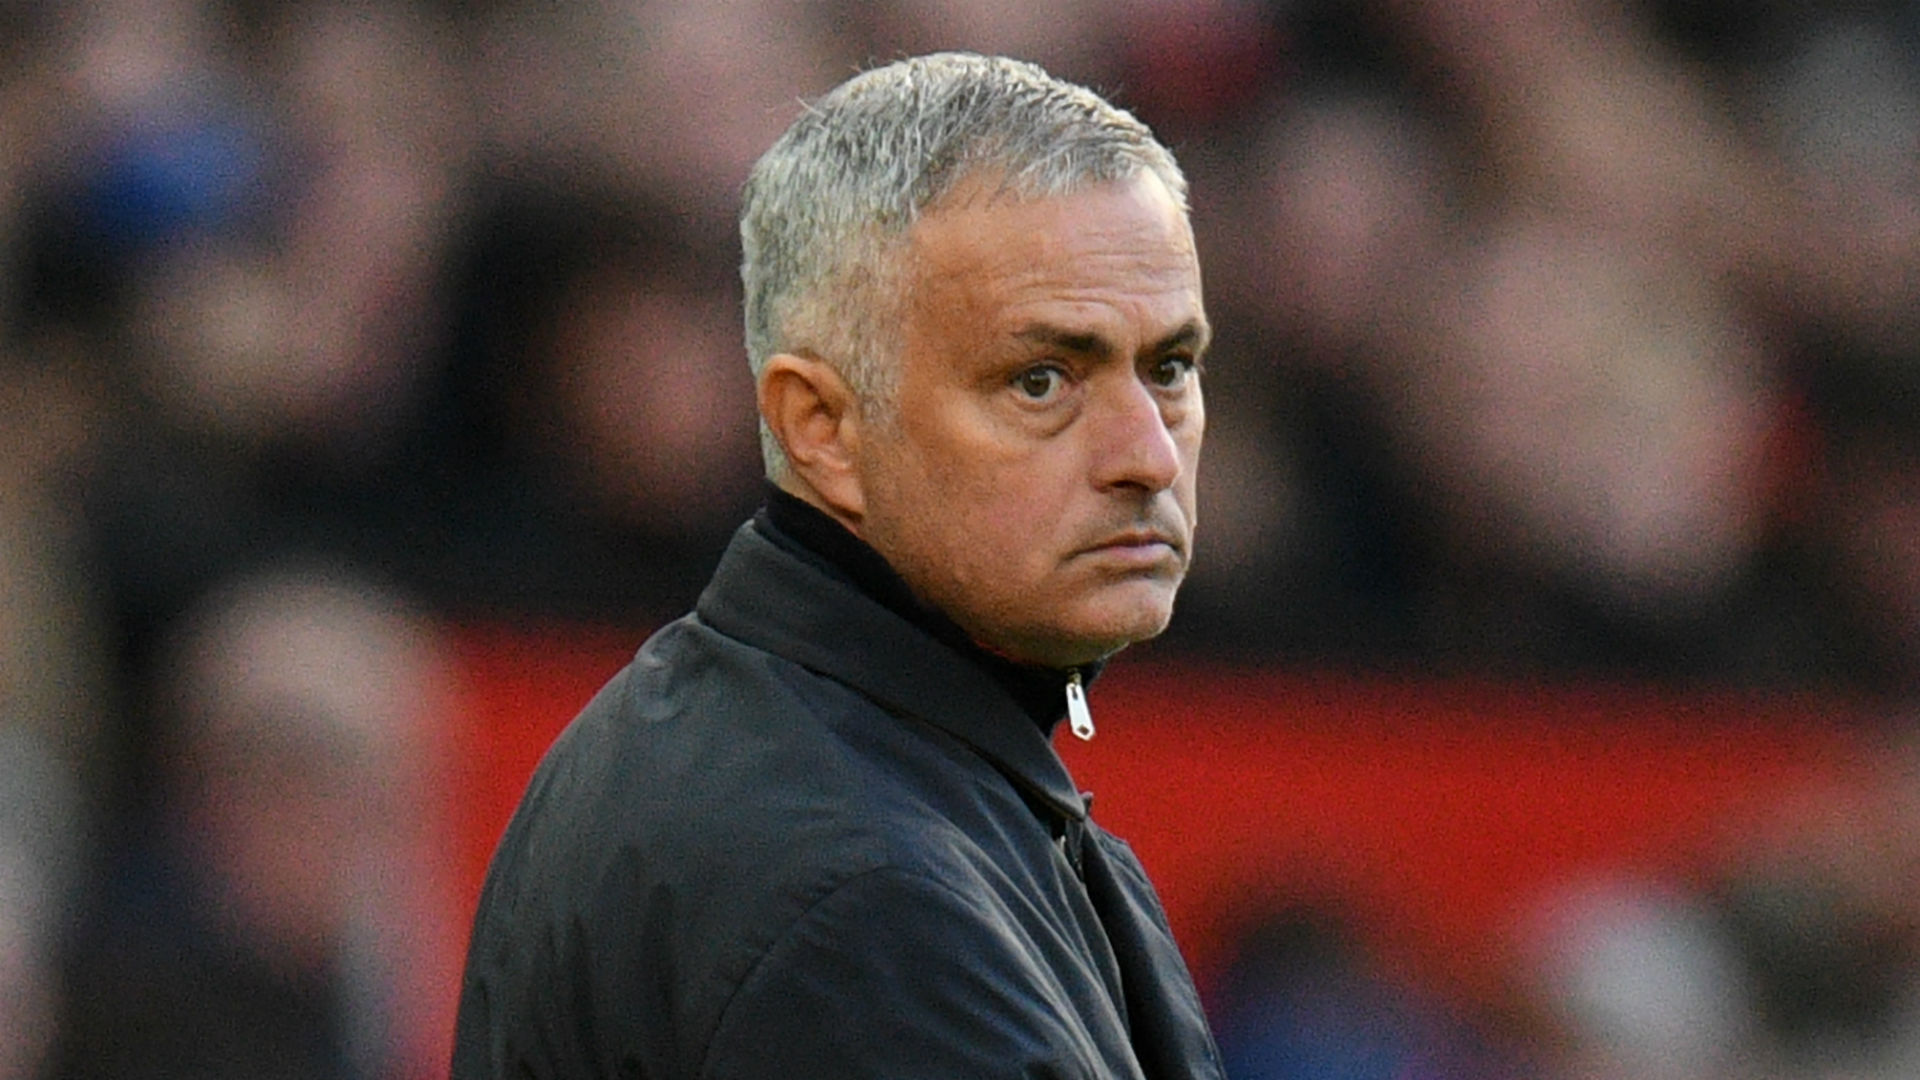 When does Jose Mourinho’s Manchester United contract expire? | Goal.com